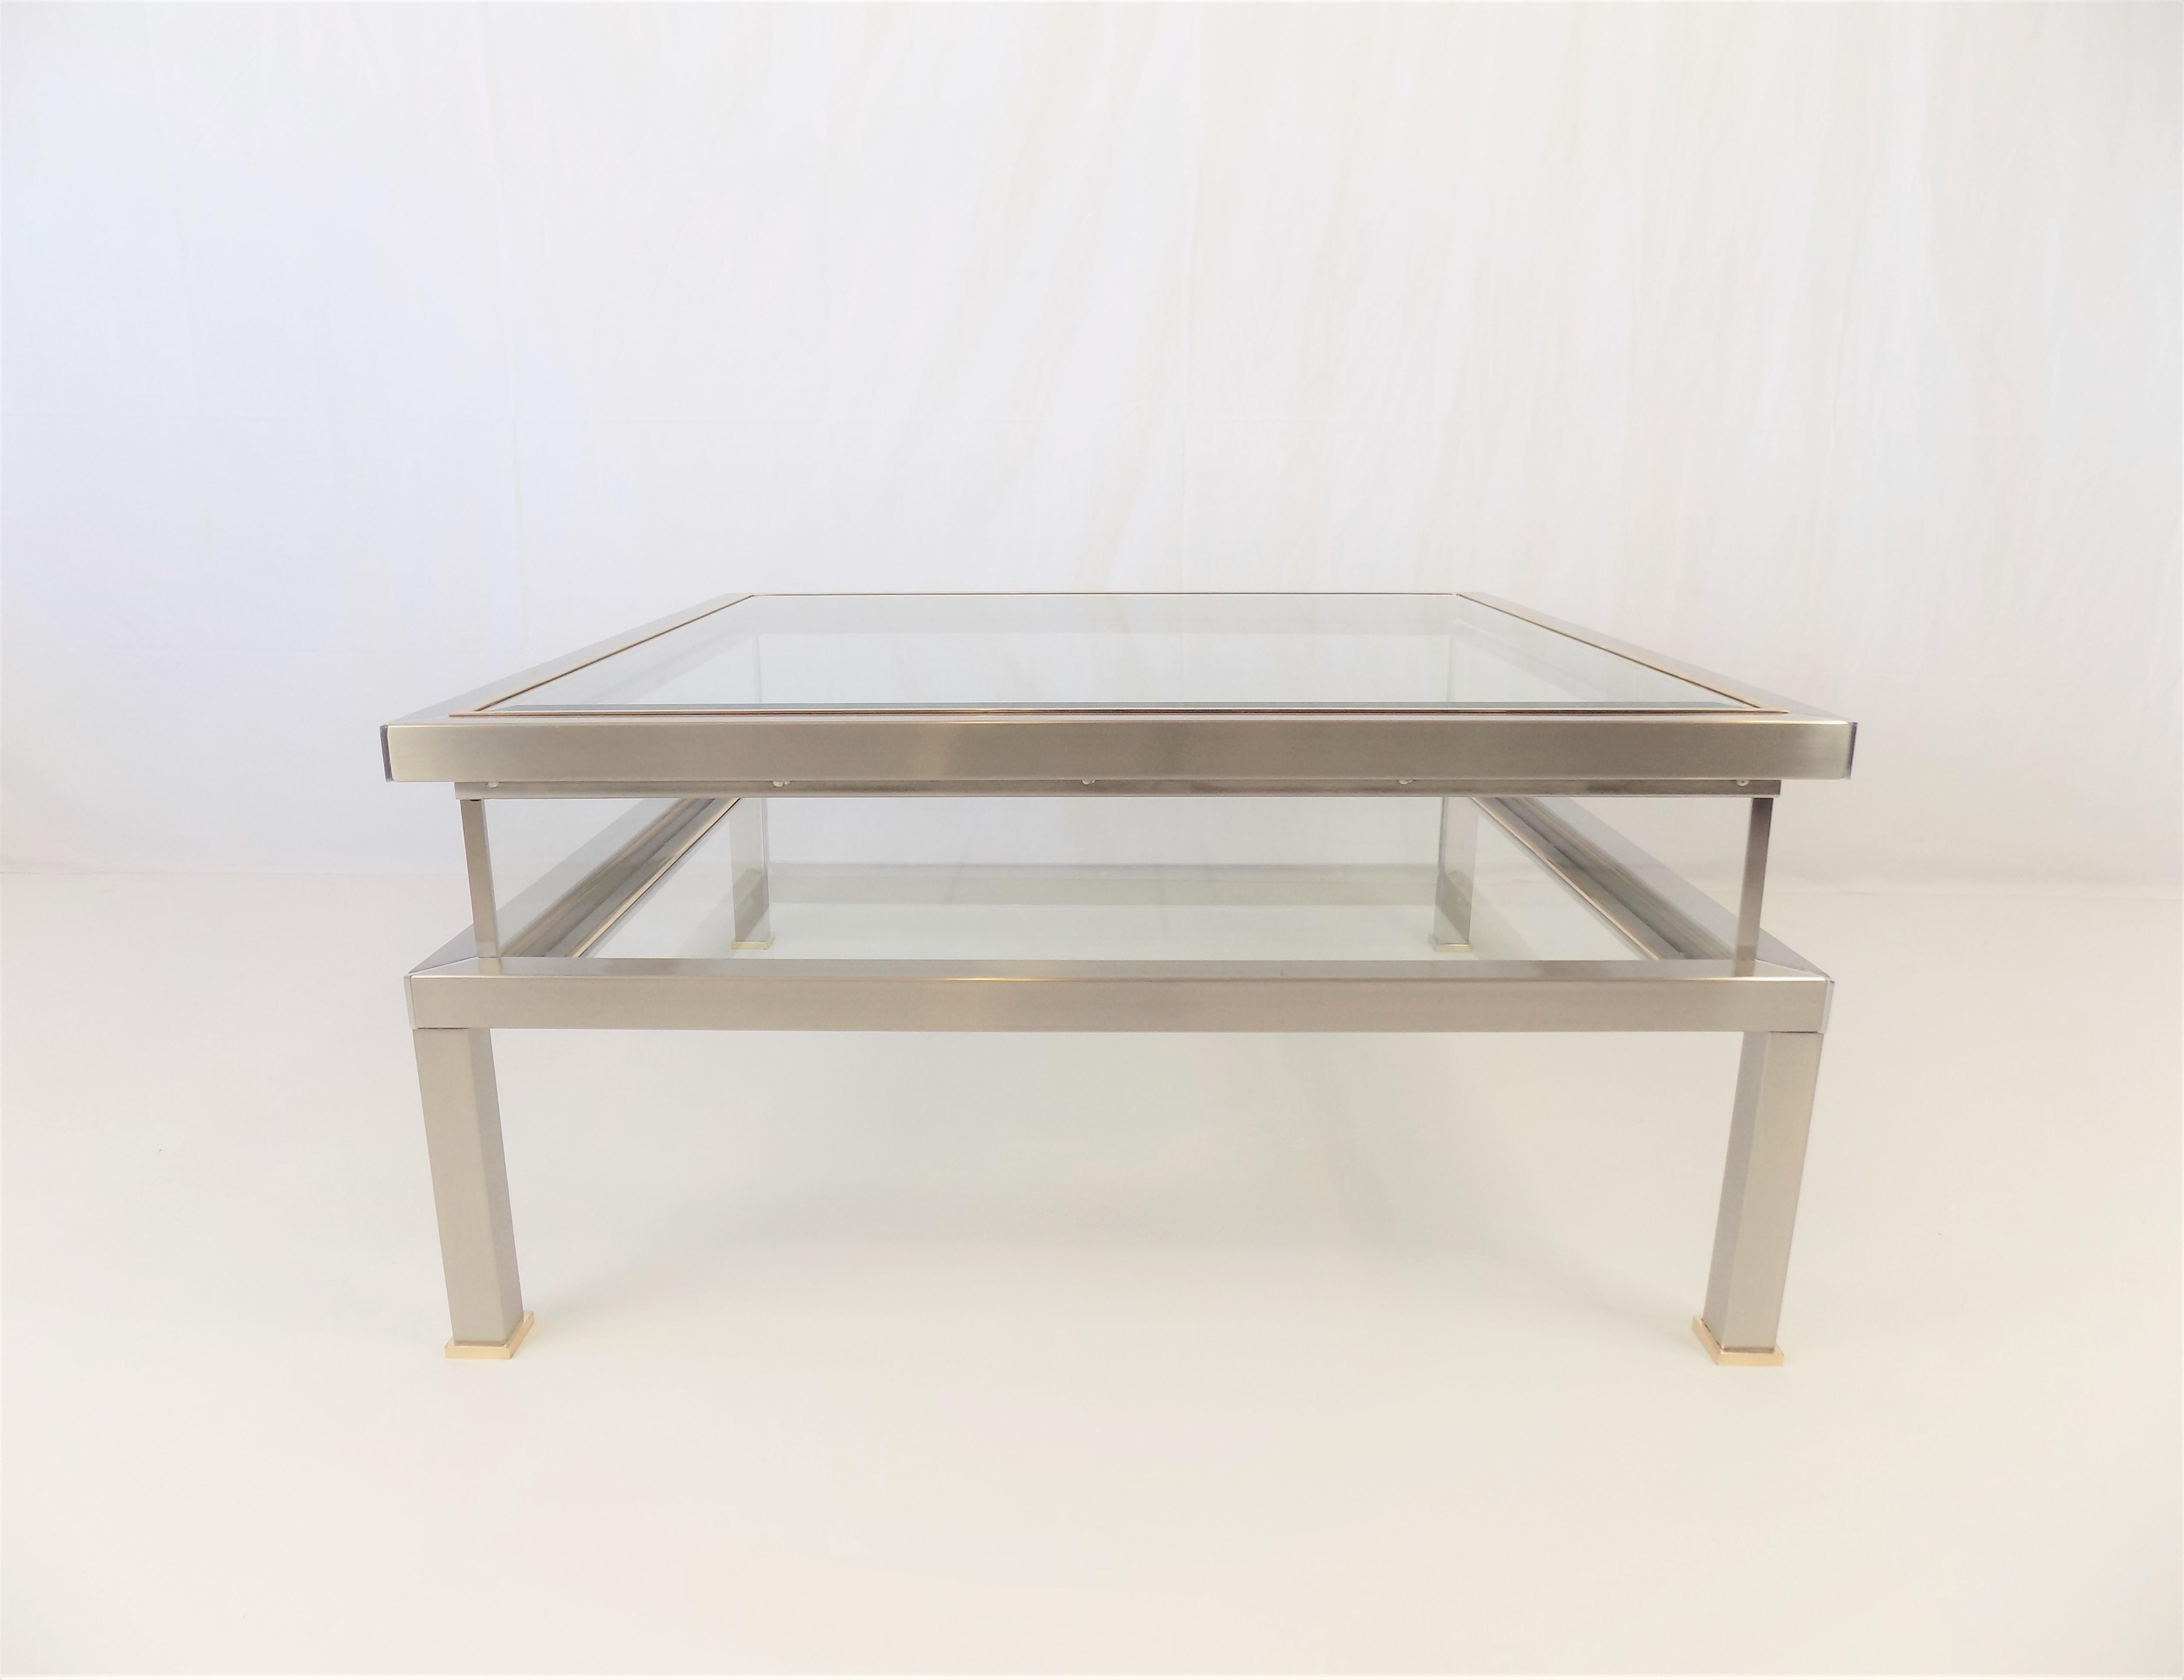 This coffee table has a sliding function on the top table top which turns it into a display table. It offers the possibility to show collectibles, magazines, etc. in the display. The table is made of solid stainless steel, the frames of the two